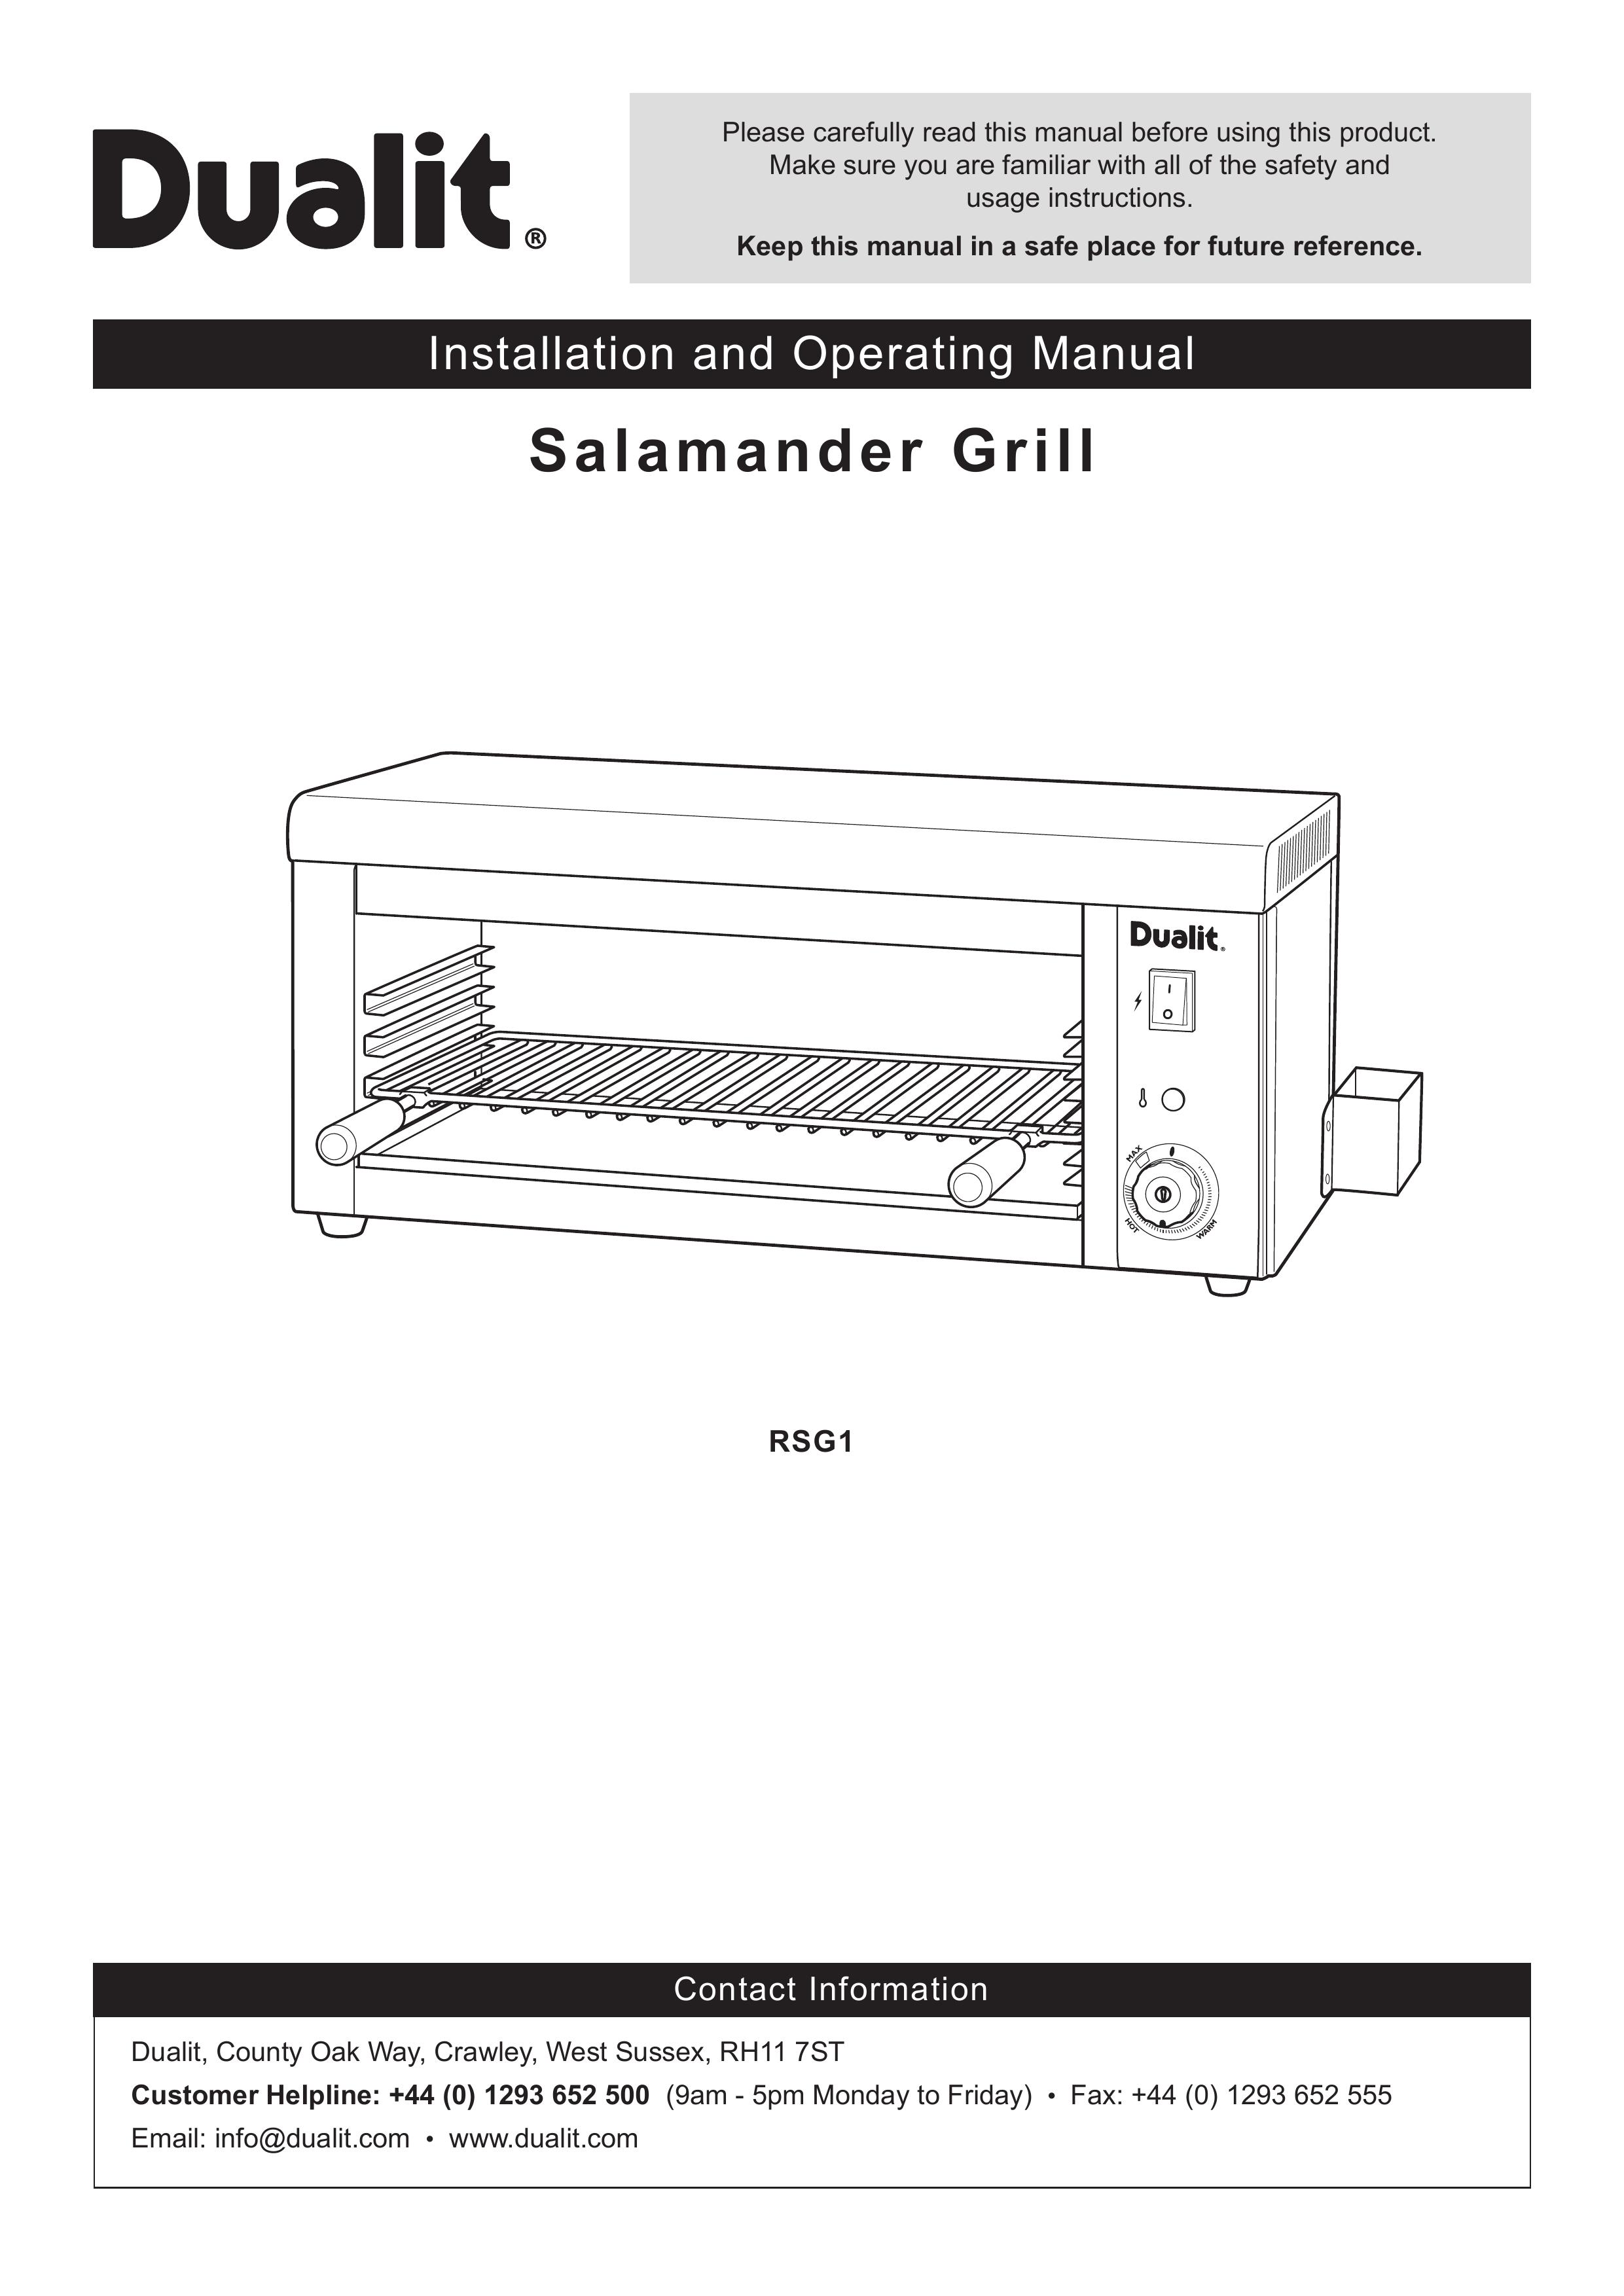 Dualit RSG1 Electric Grill User Manual (Page 1)